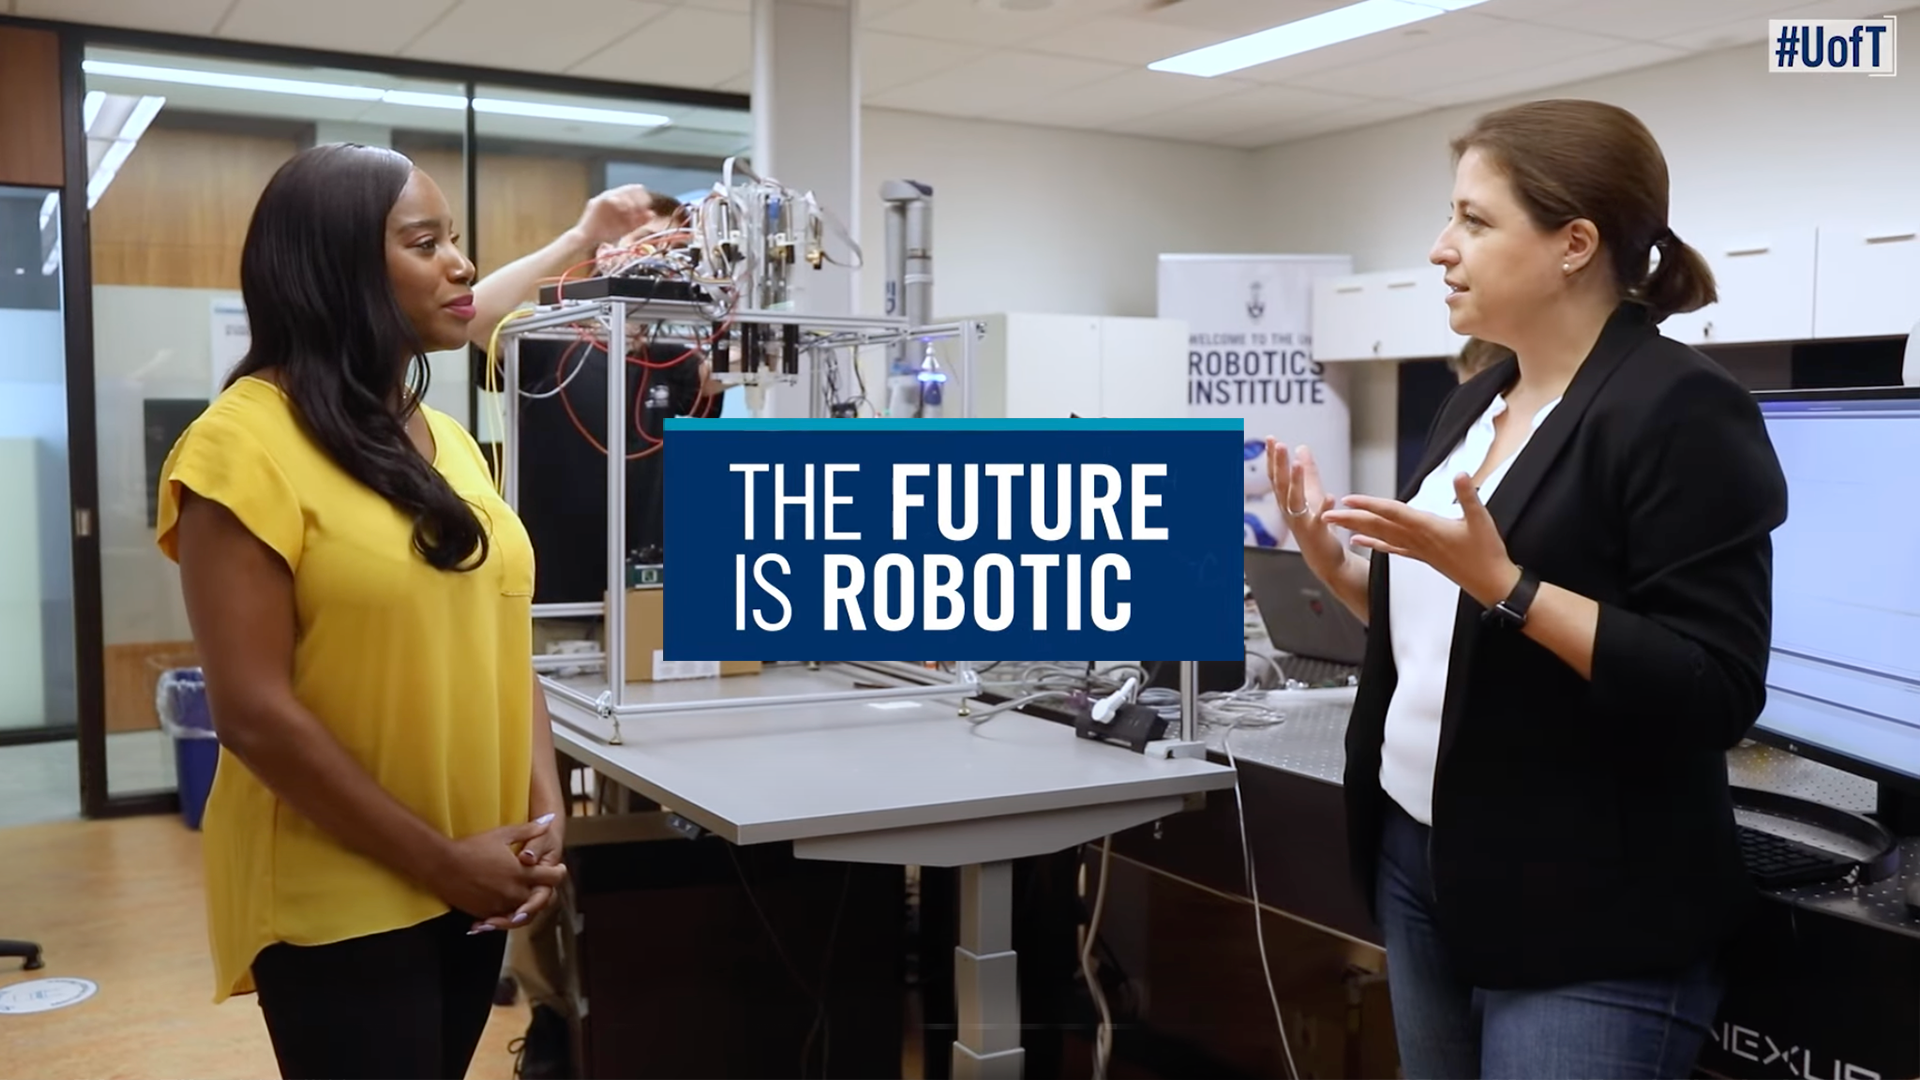 Ainka Jess and Jessica Burgner-Kahrs converse at the Robotics Institute